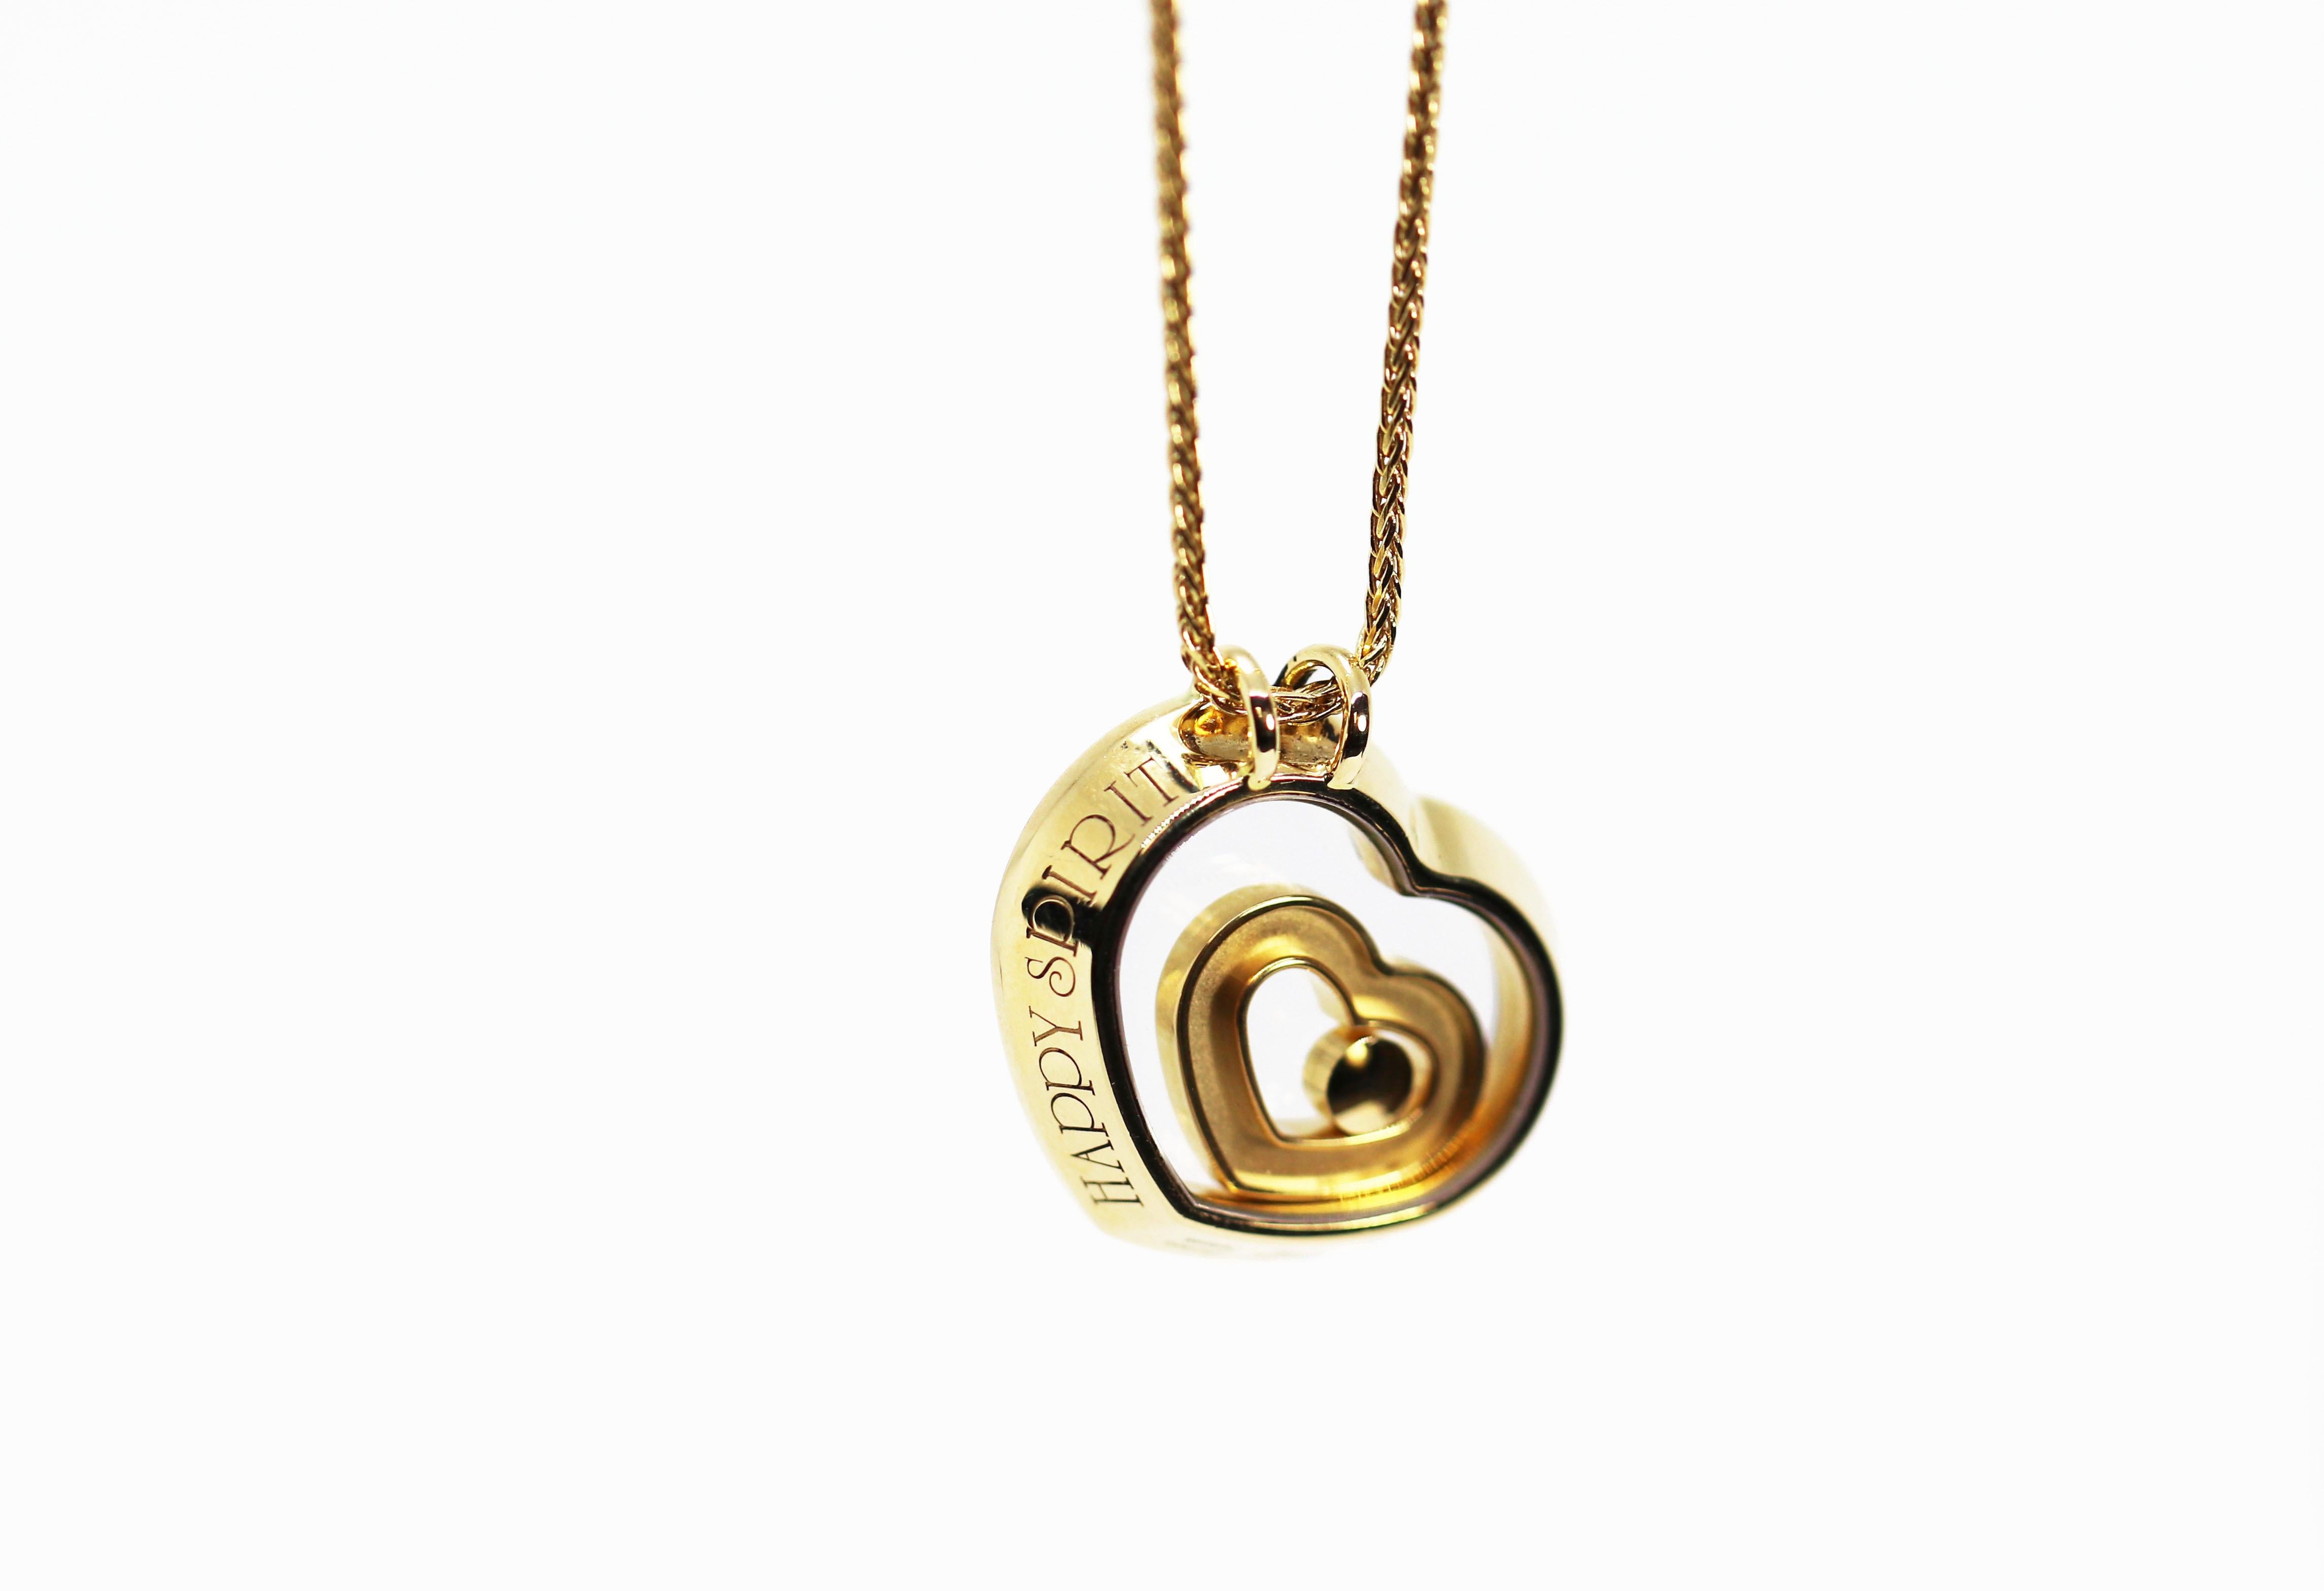 Round Cut Chopard 18 Carat Yellow Gold and Diamond Happy Spirit Heart Pendant and Chain